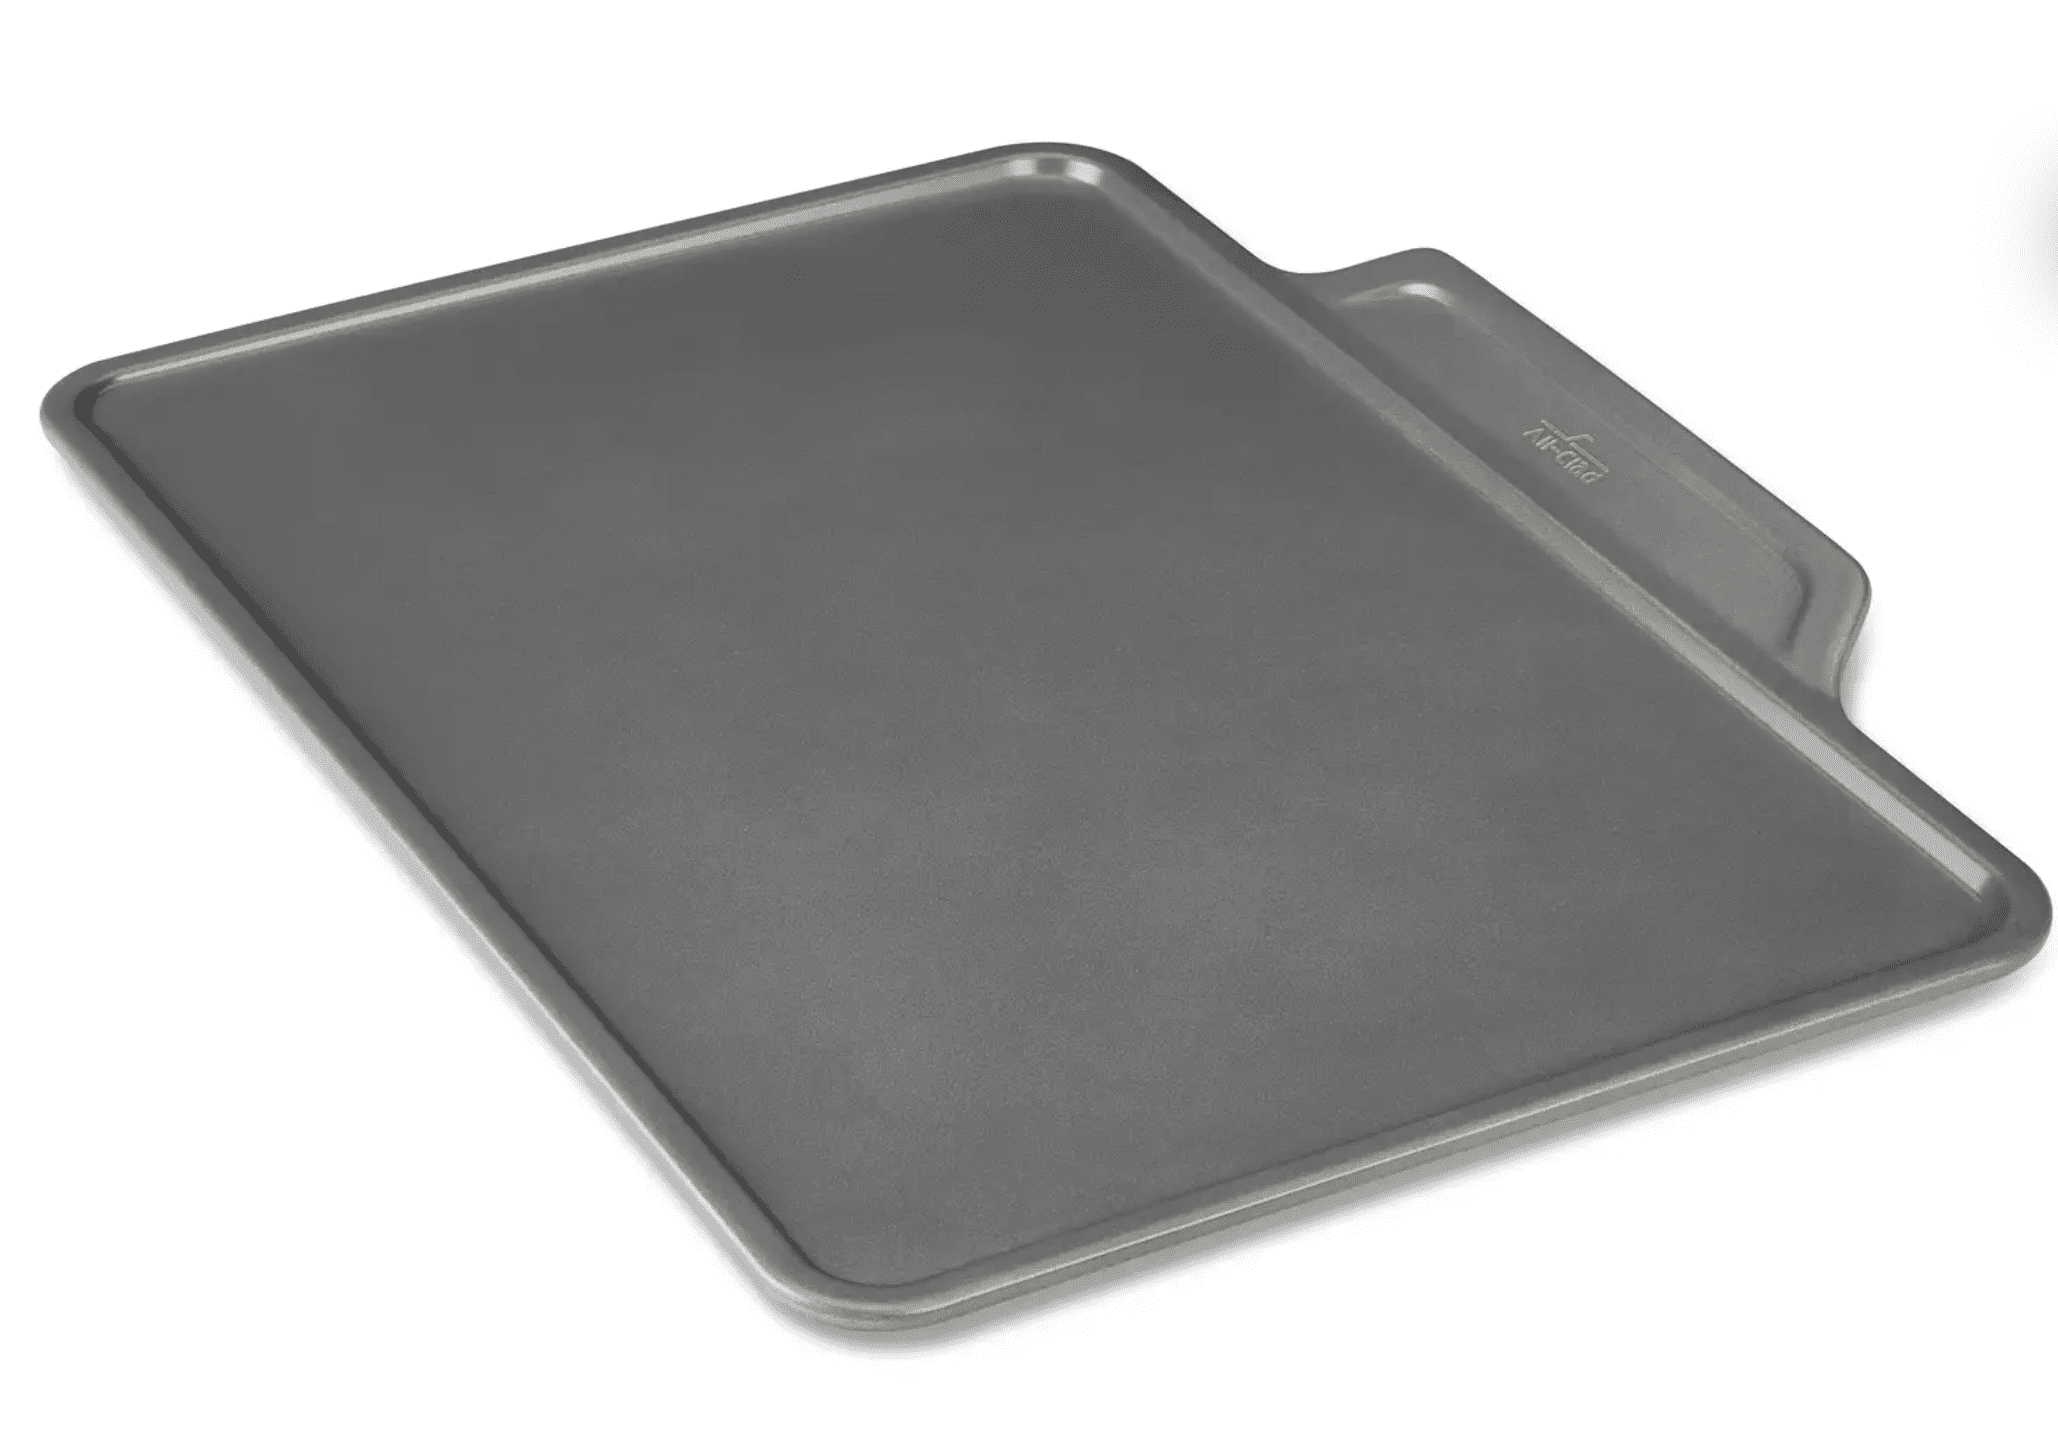 http://cdn.apartmenttherapy.info/image/upload/v1665426658/gen-workflow/product-database/All_Clad_12-inch_x_17-inch_Cookie_Sheet.png